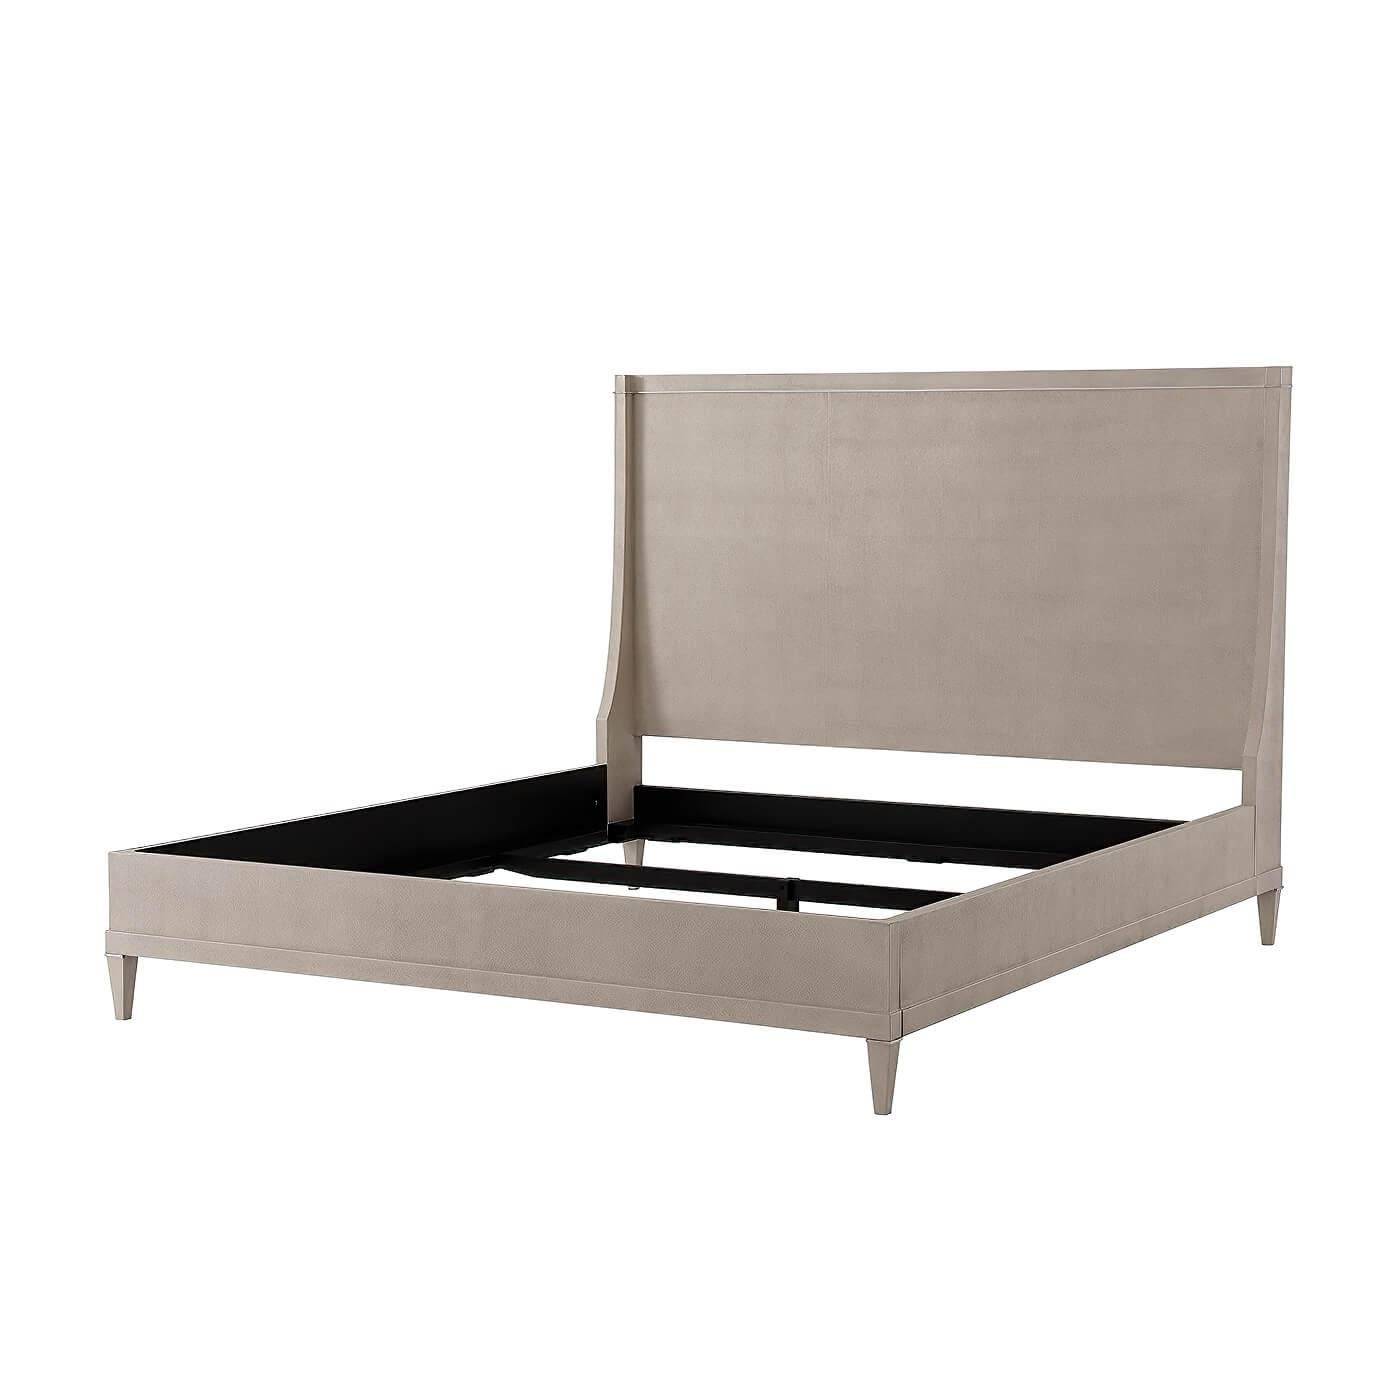 A modern embossed overcast finish leather-wrapped California king size bed with a winged end headboard, polished nickel molding detail inlays and a stepped rail frame with square tapered legs.
Dimensions: 77.5